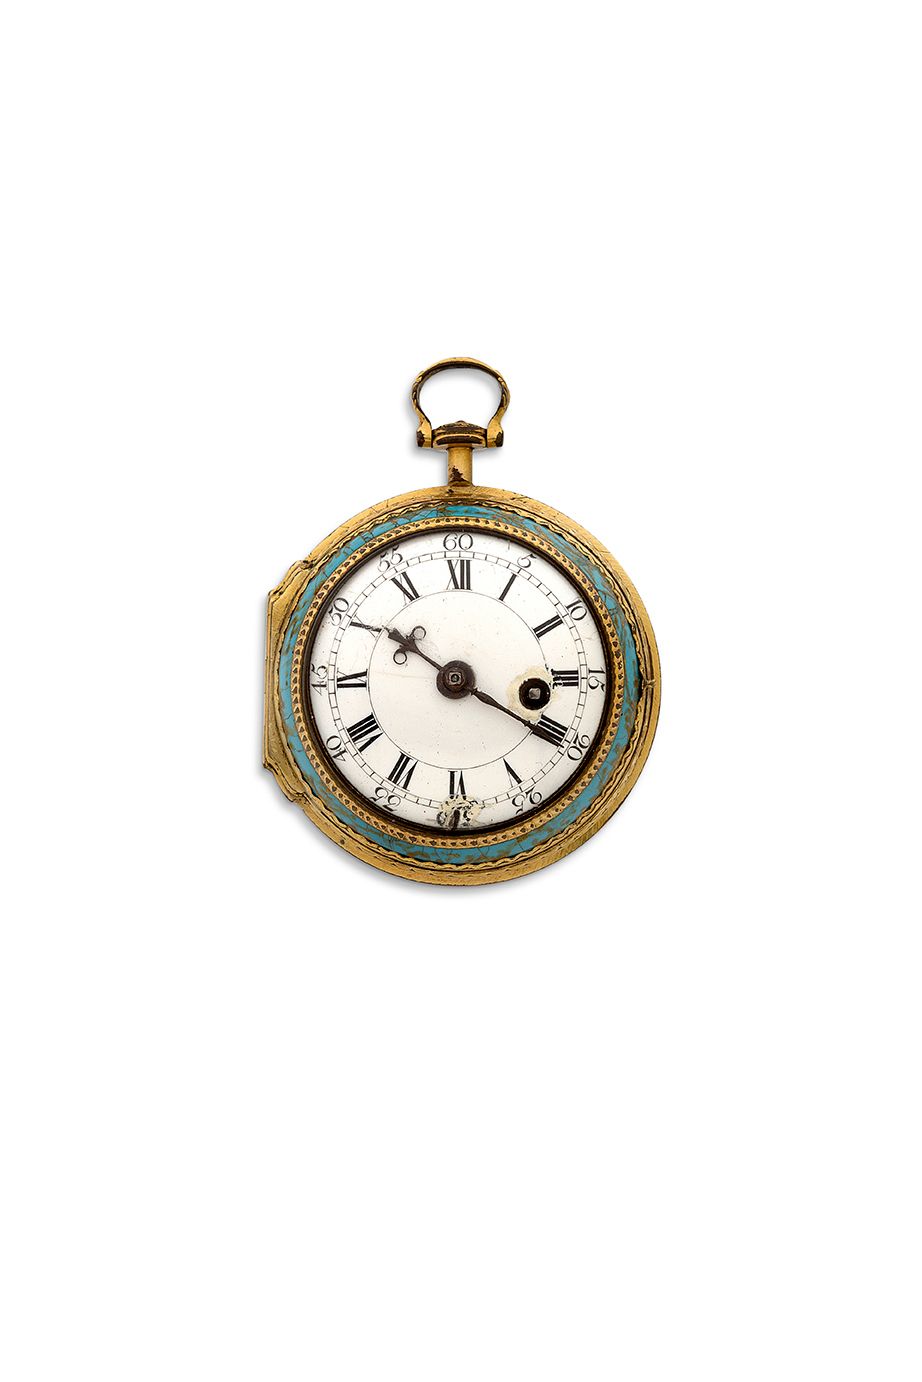 Rich. JOHNSON, London 
Watch "polissonne" in gilded and enamelled metal with a h&hellip;